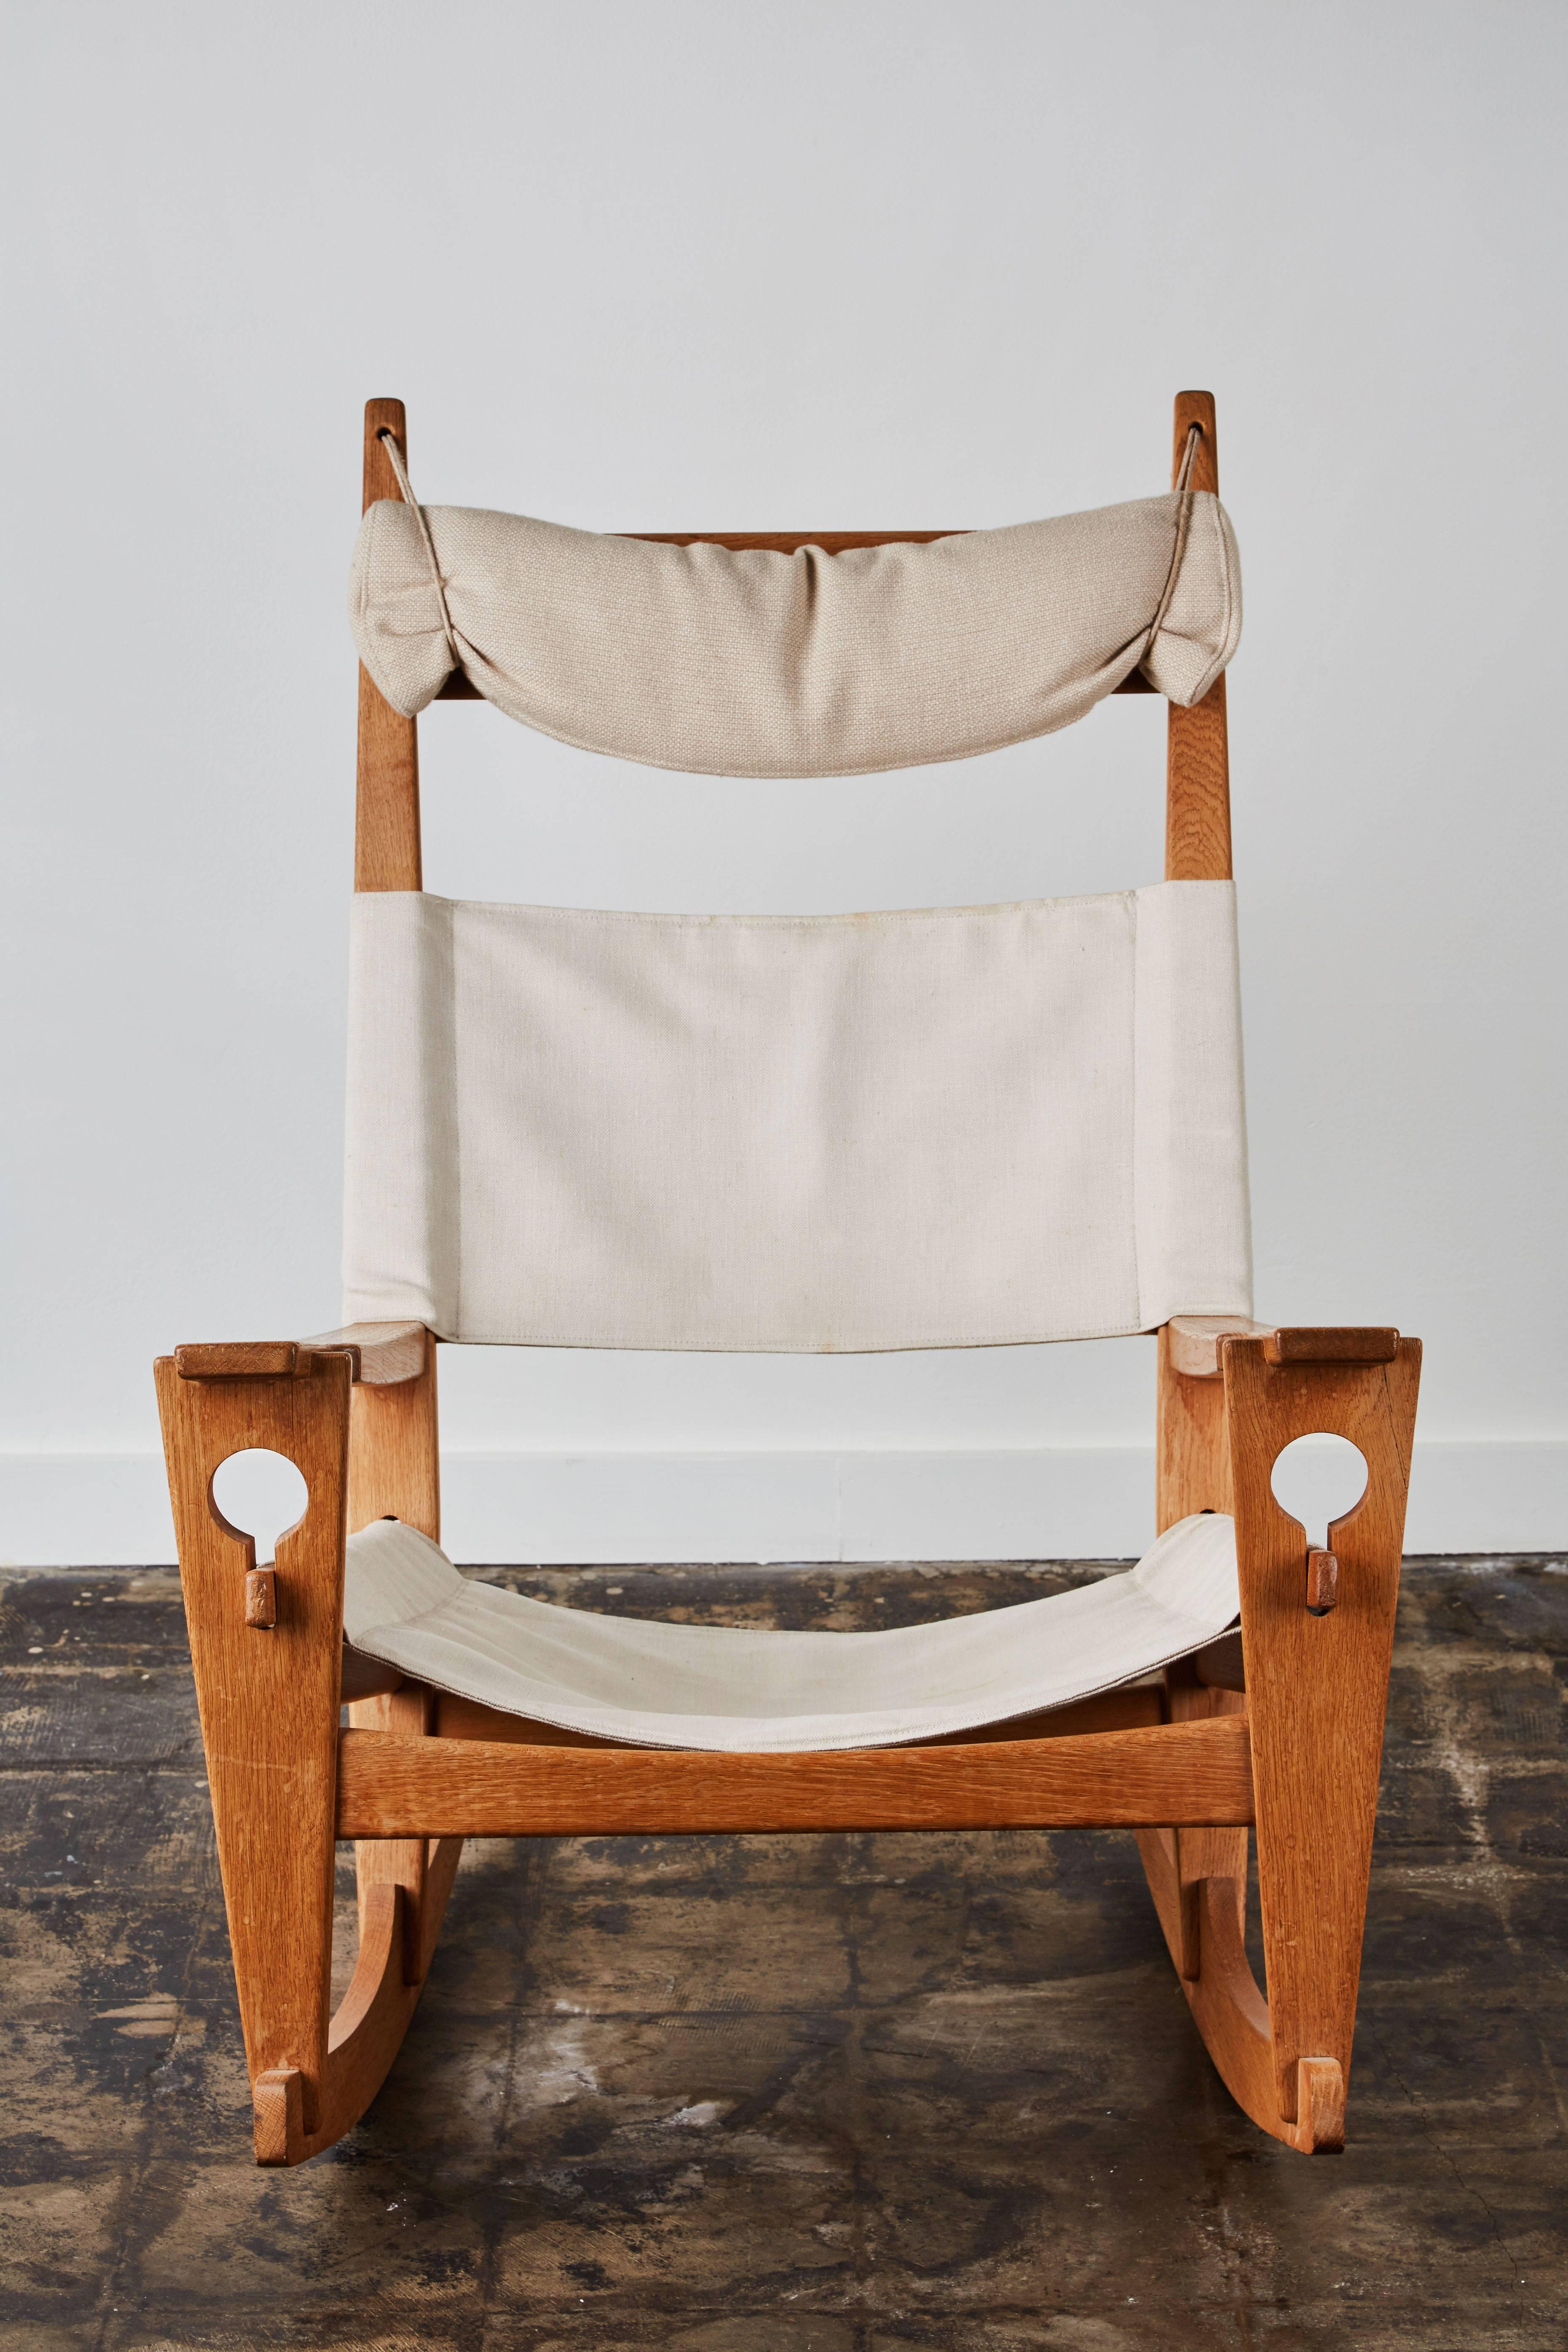 Keyhole 675 rocking chair by Hans Wegner for GETAMA. Oak frame and natural linen. Made in Denmark, circa 1967.